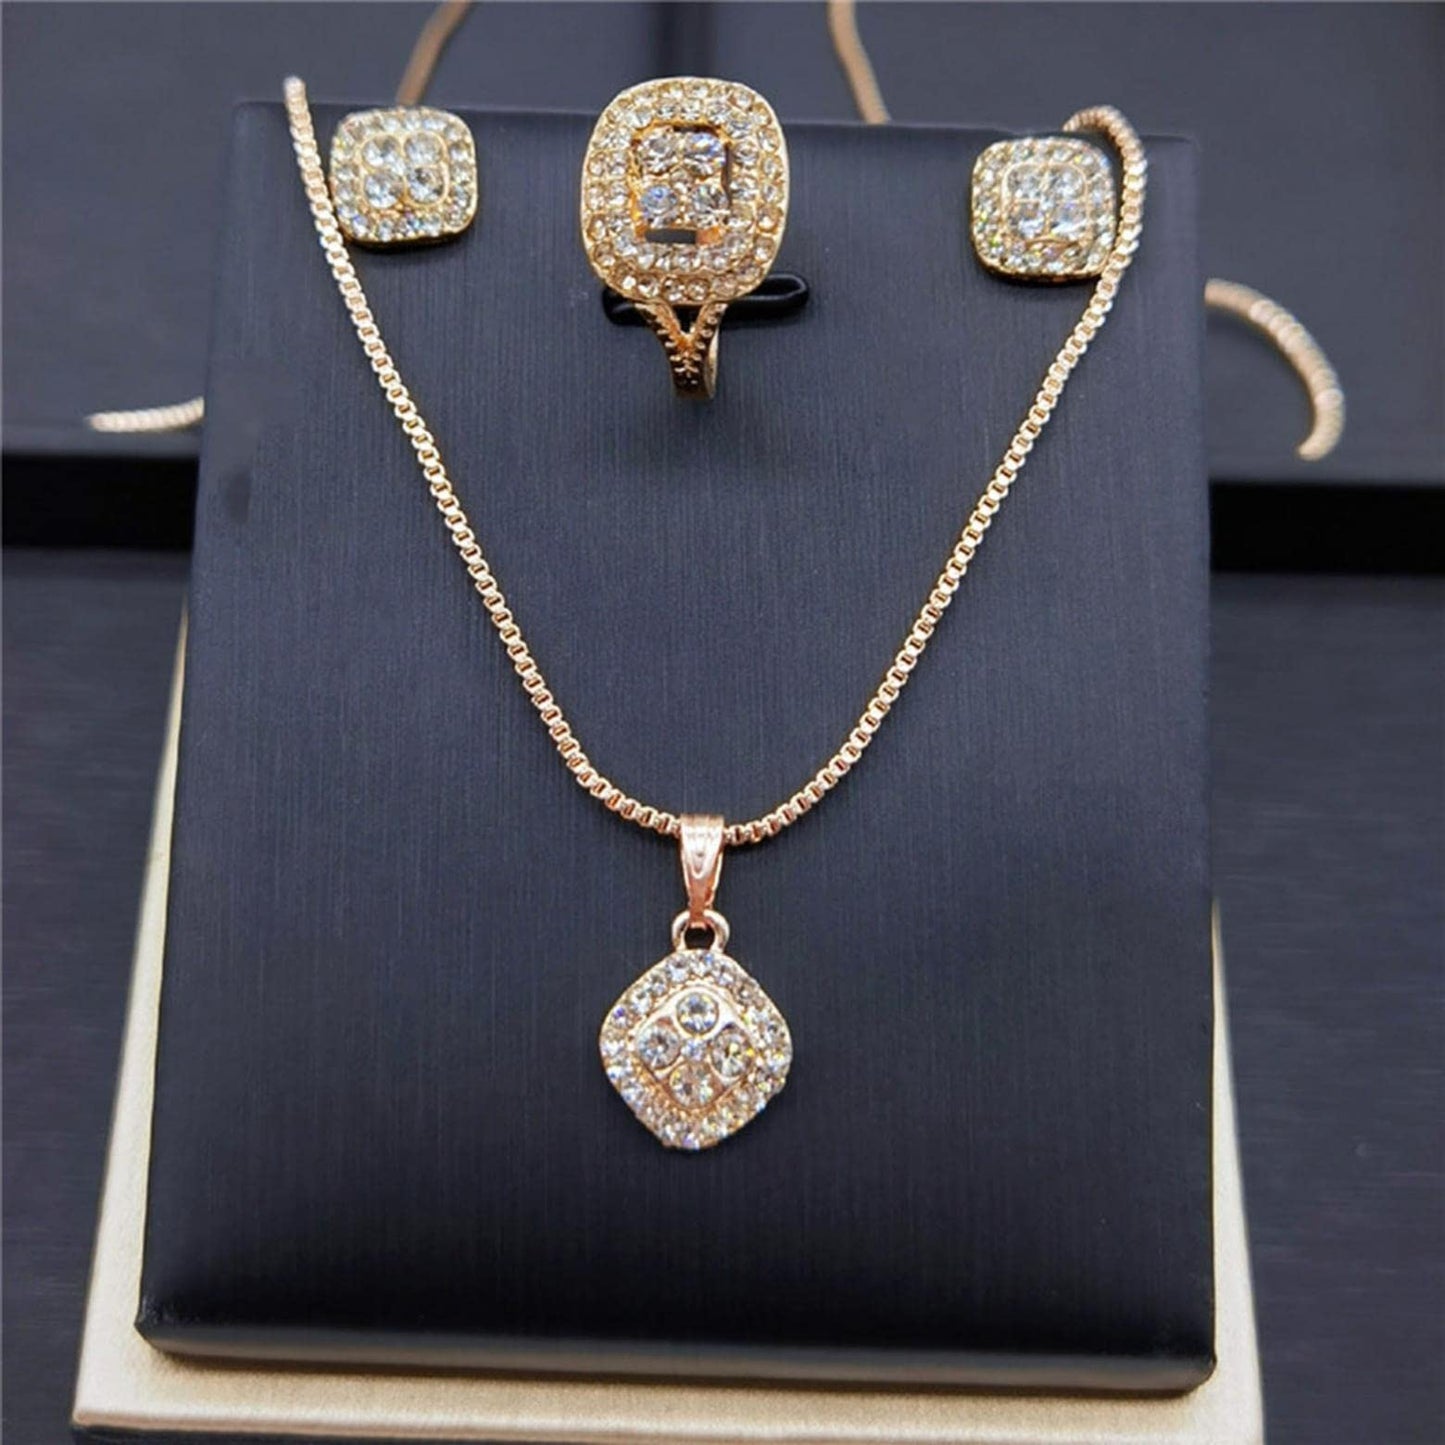 3pc Necklace Earring Set Three Piece Pendant Clavicle Chain Jewelry Set Dress Up Gold/Sliver Jewelry Set for Women Classic Prong Setting Jewelry Set Mothers Day Gifts Ring Earrings Collarbone Necklace